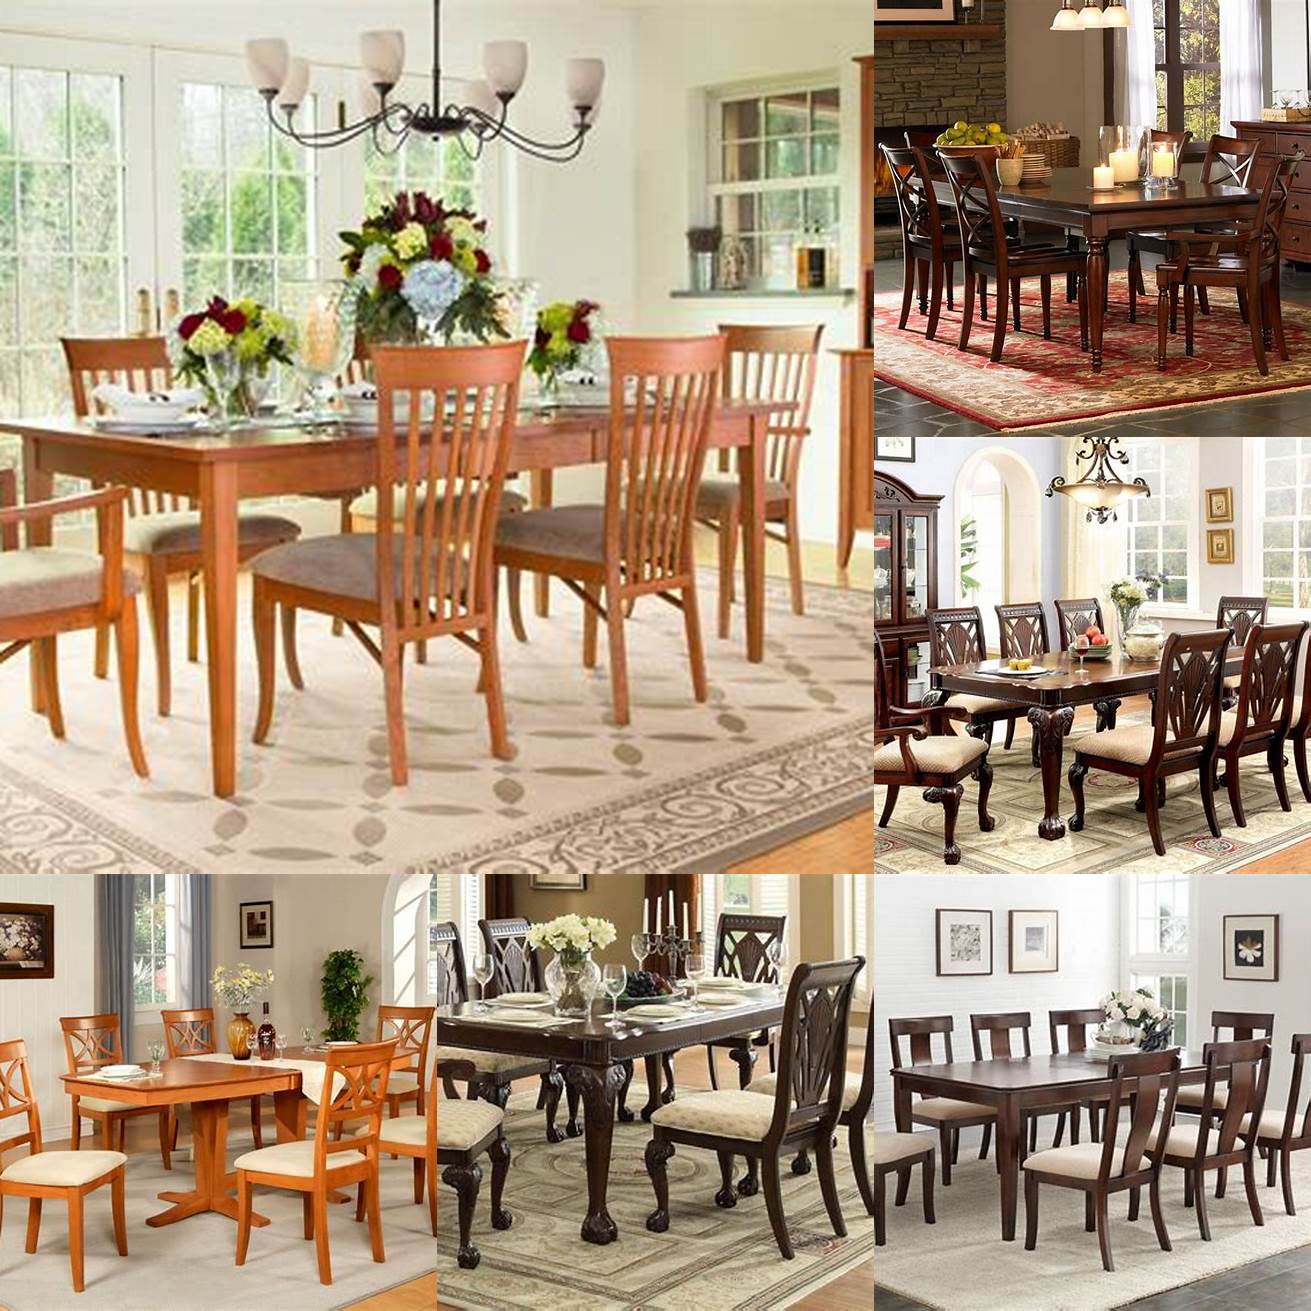 Cherry wood dining table with upholstered chairs